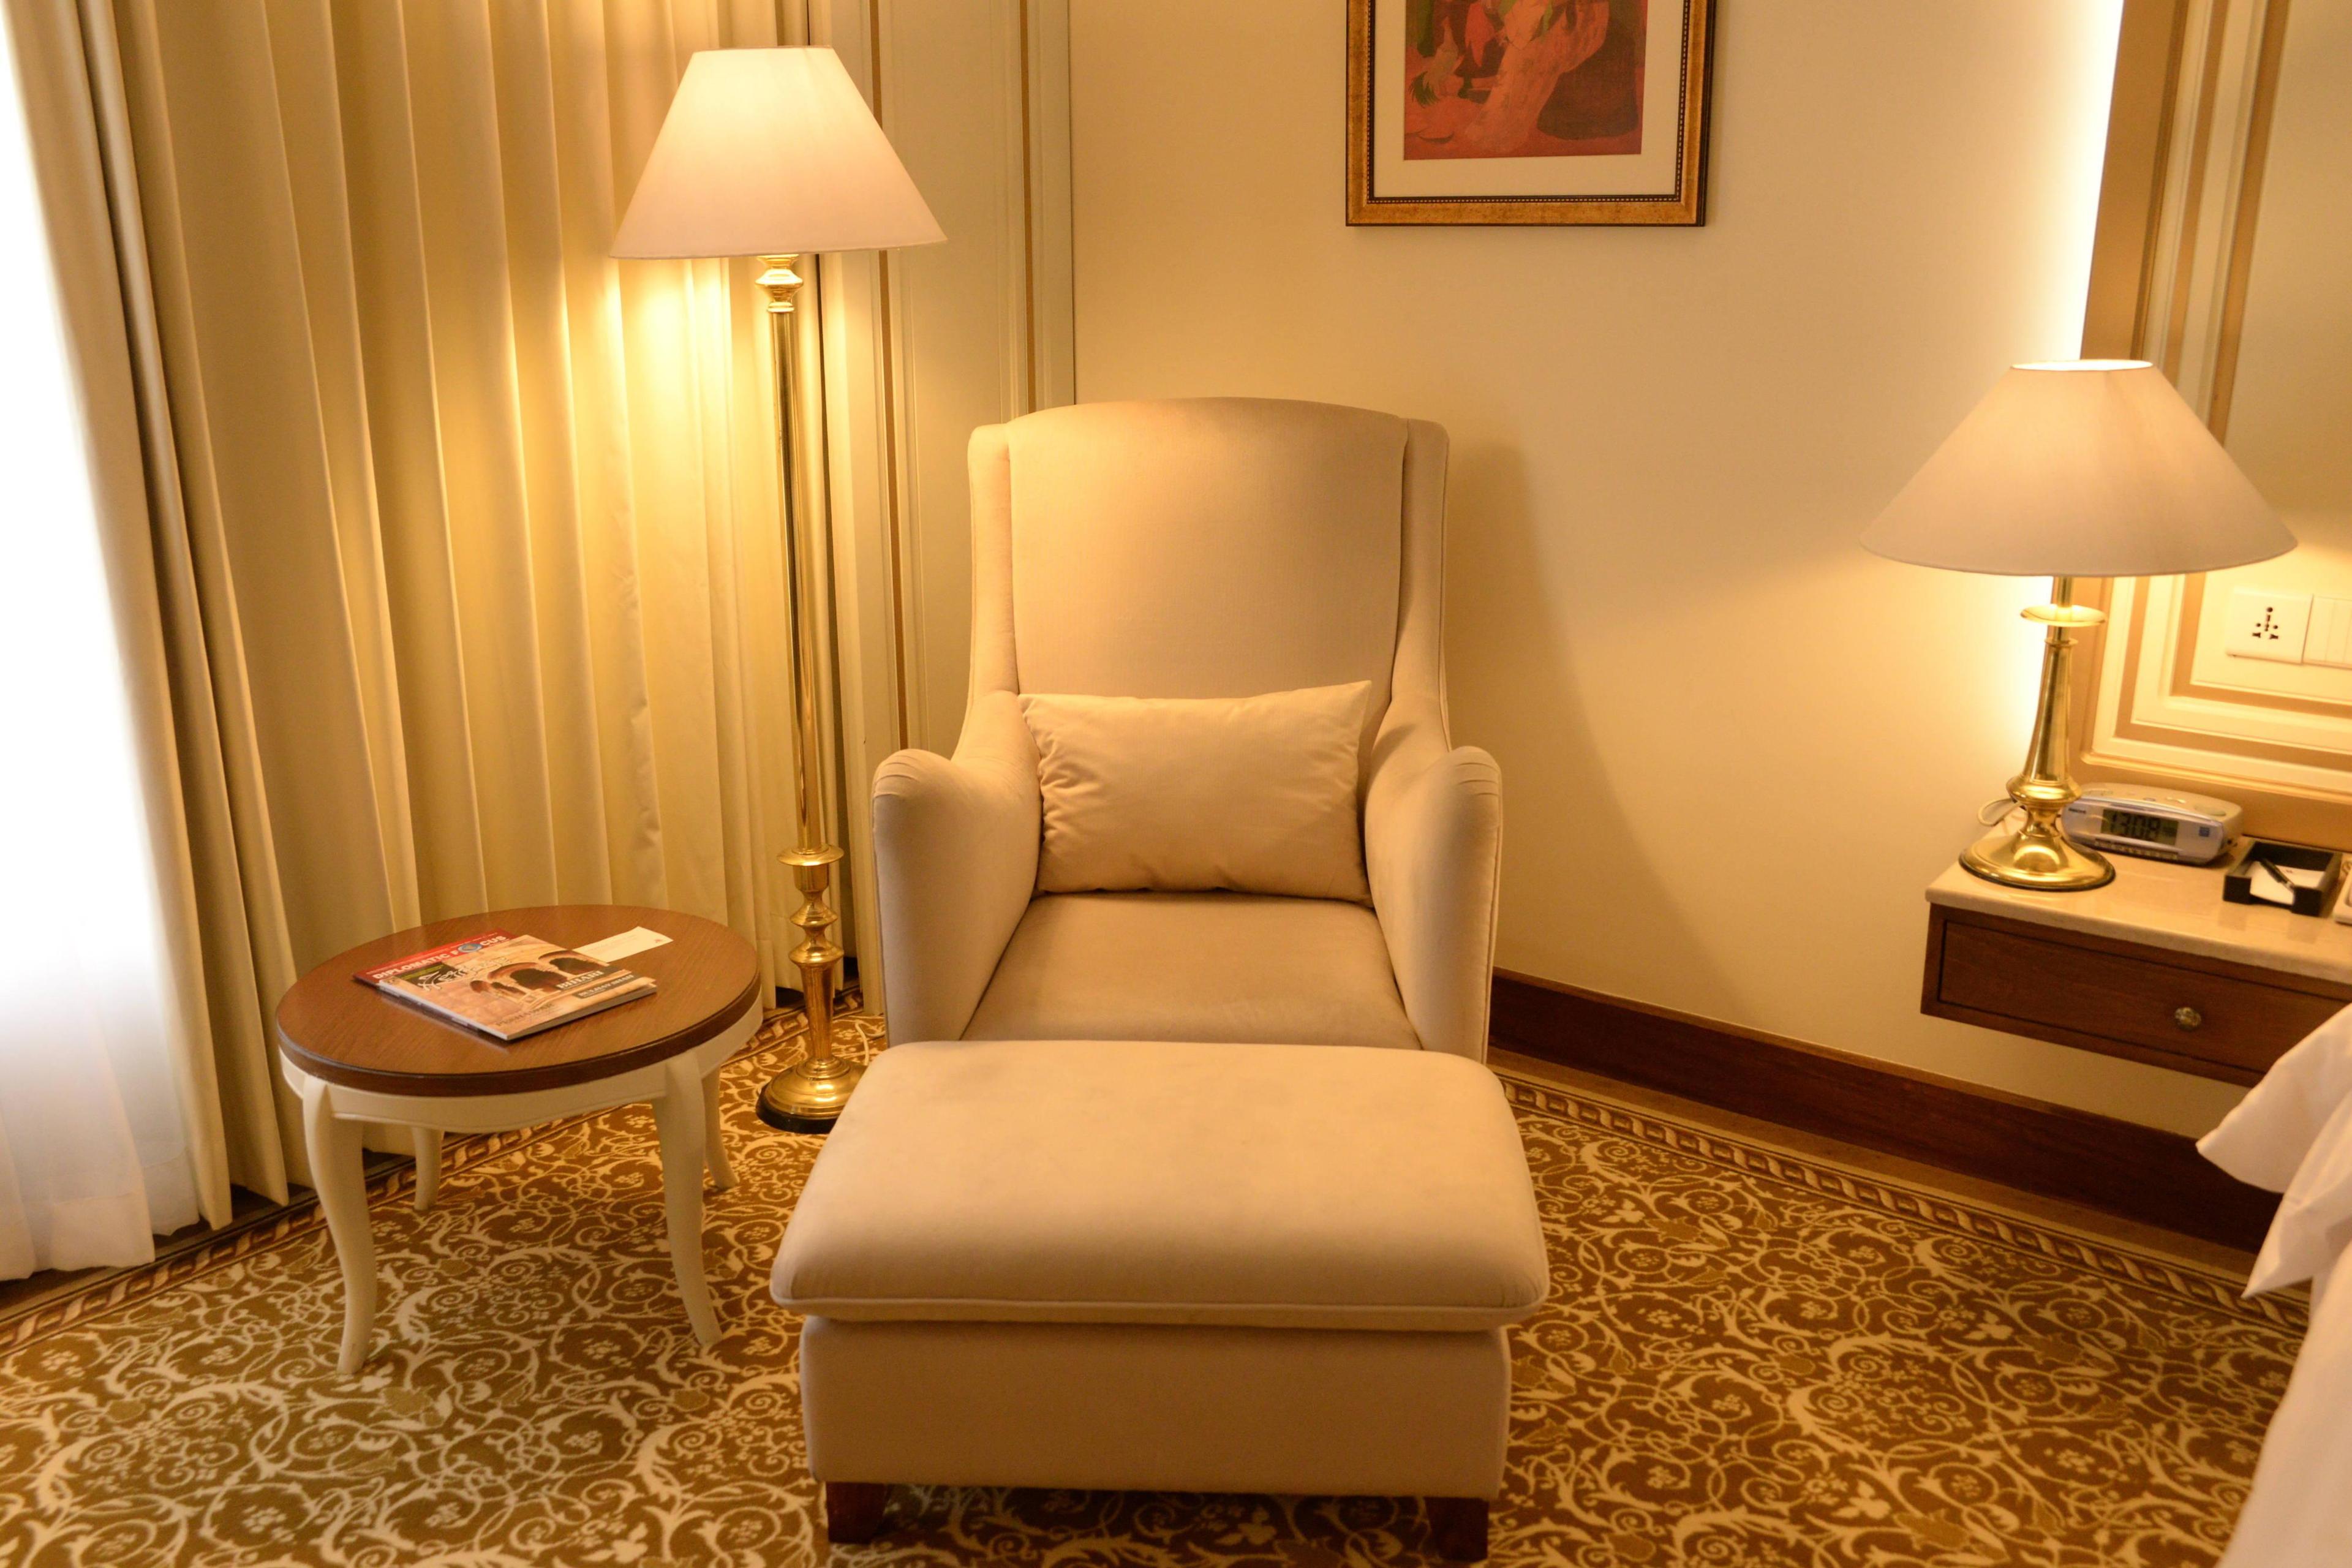 Our deluxe twin/twin sitting area is comfortable, well-lit for reading and relaxing or preparing for a productive day.